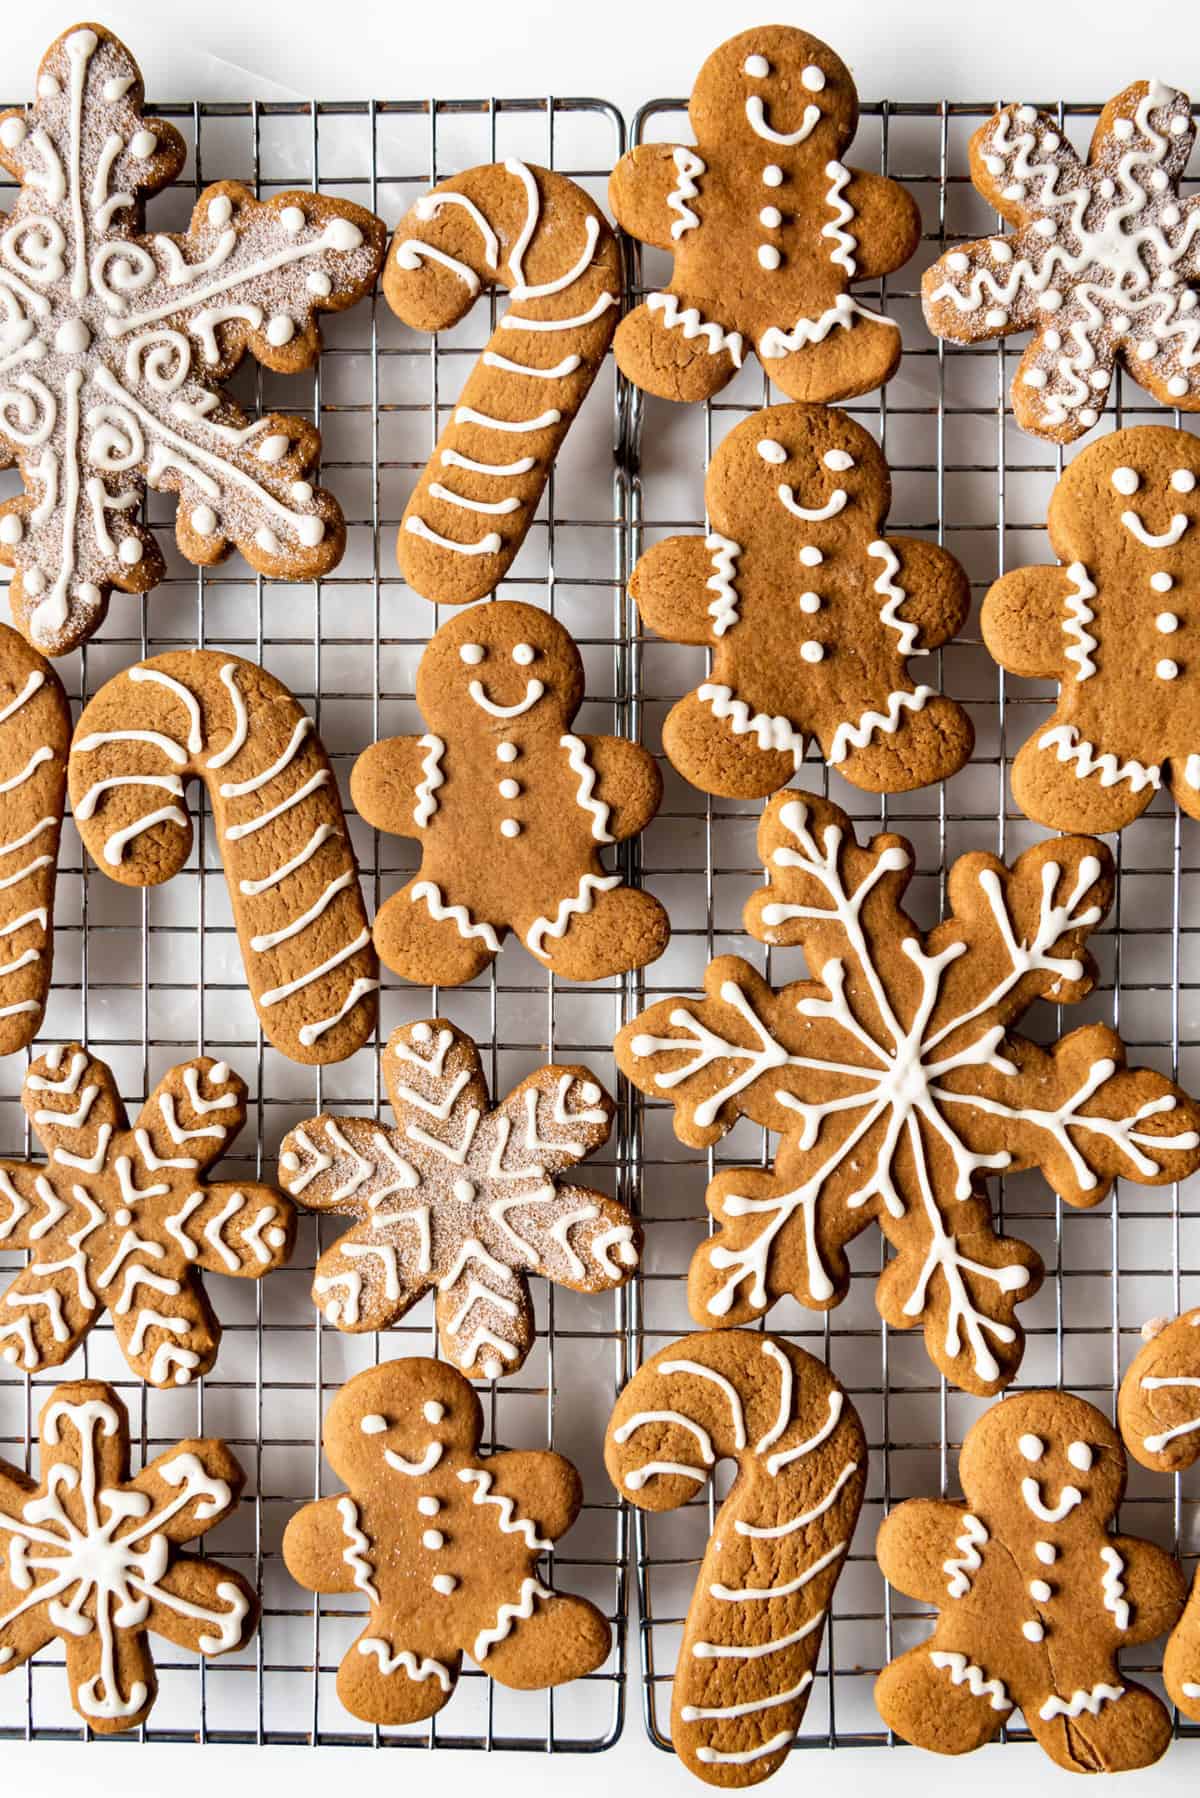 Decorated gingerbread cookies on a wire cooling rack.